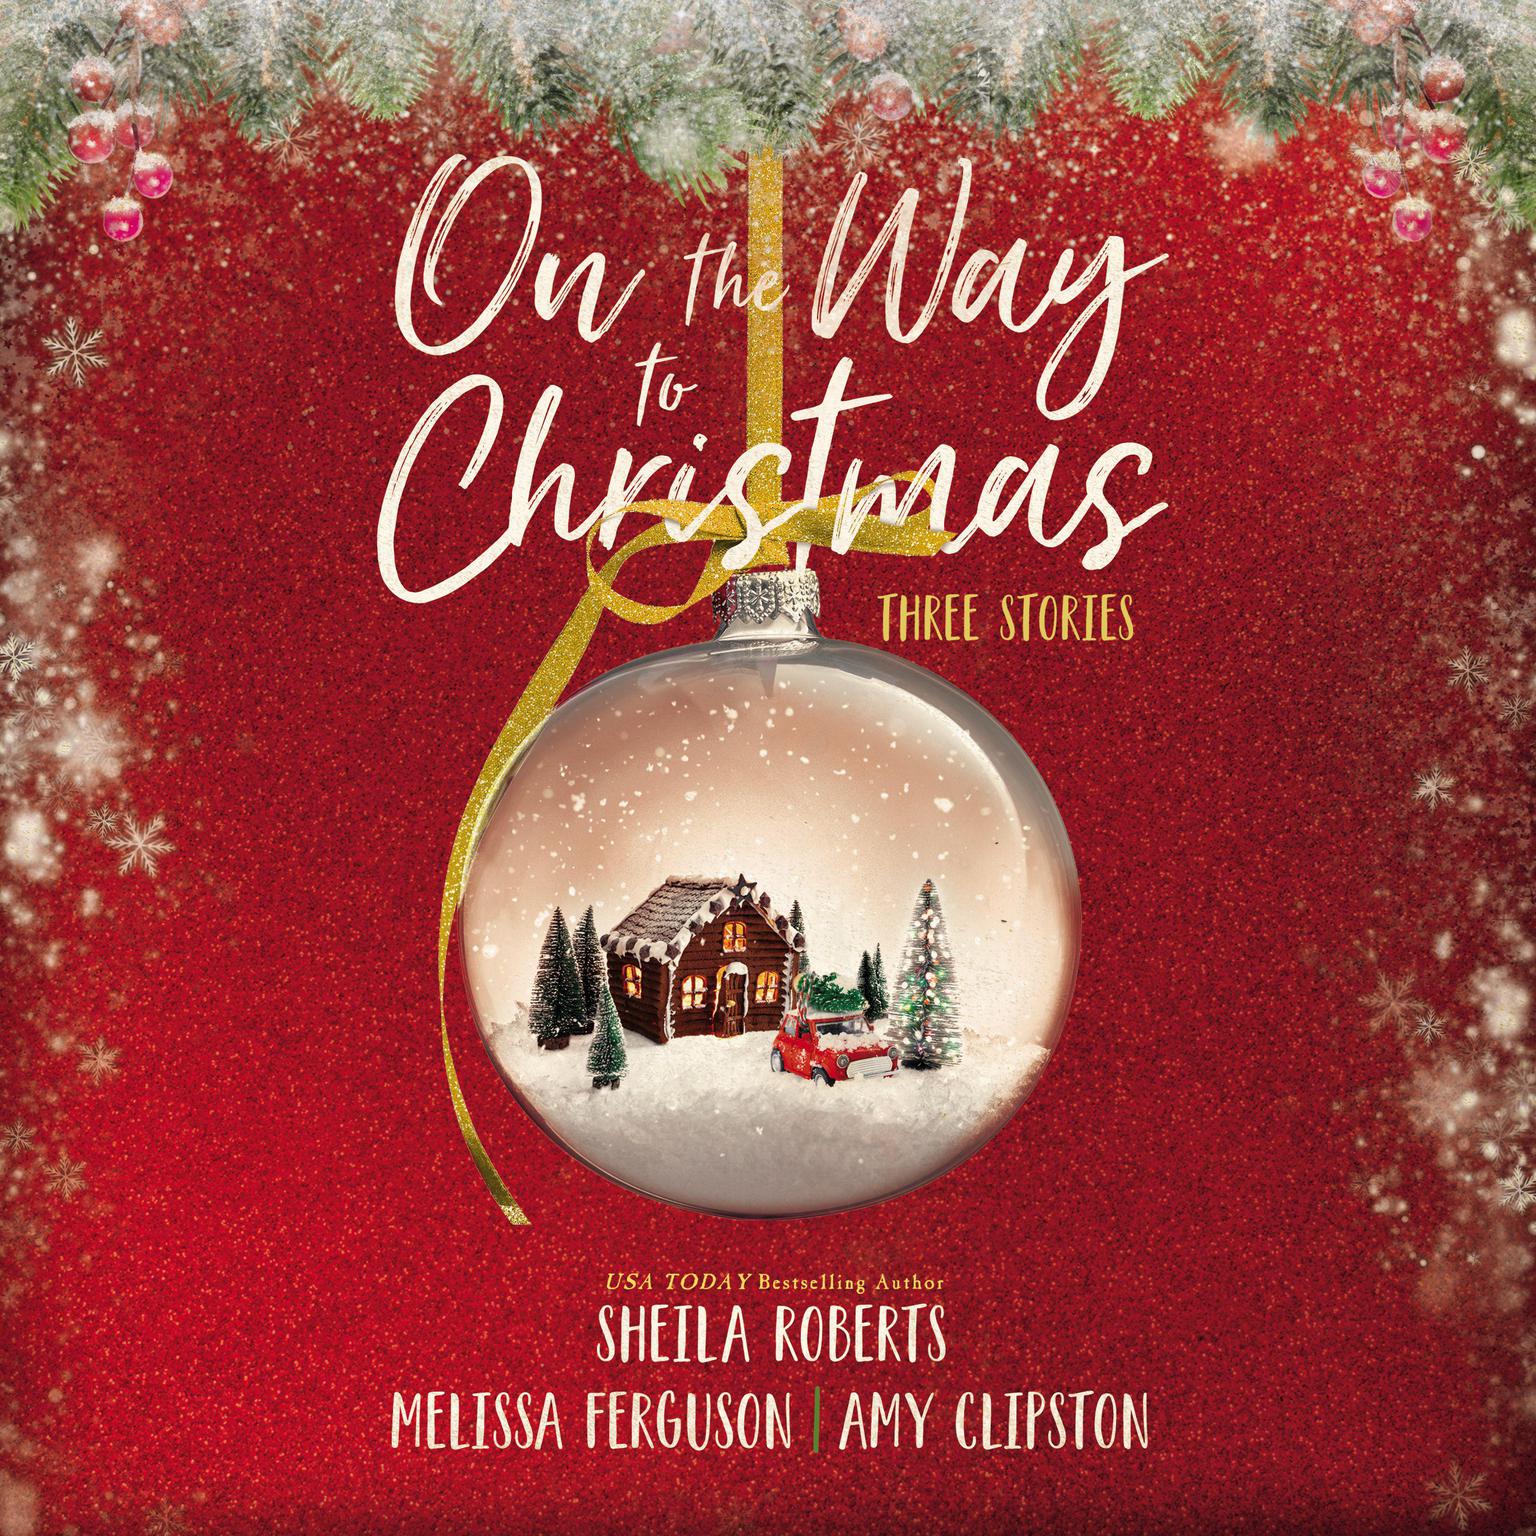 On the Way to Christmas: Three Stories Audiobook, by Sheila Roberts